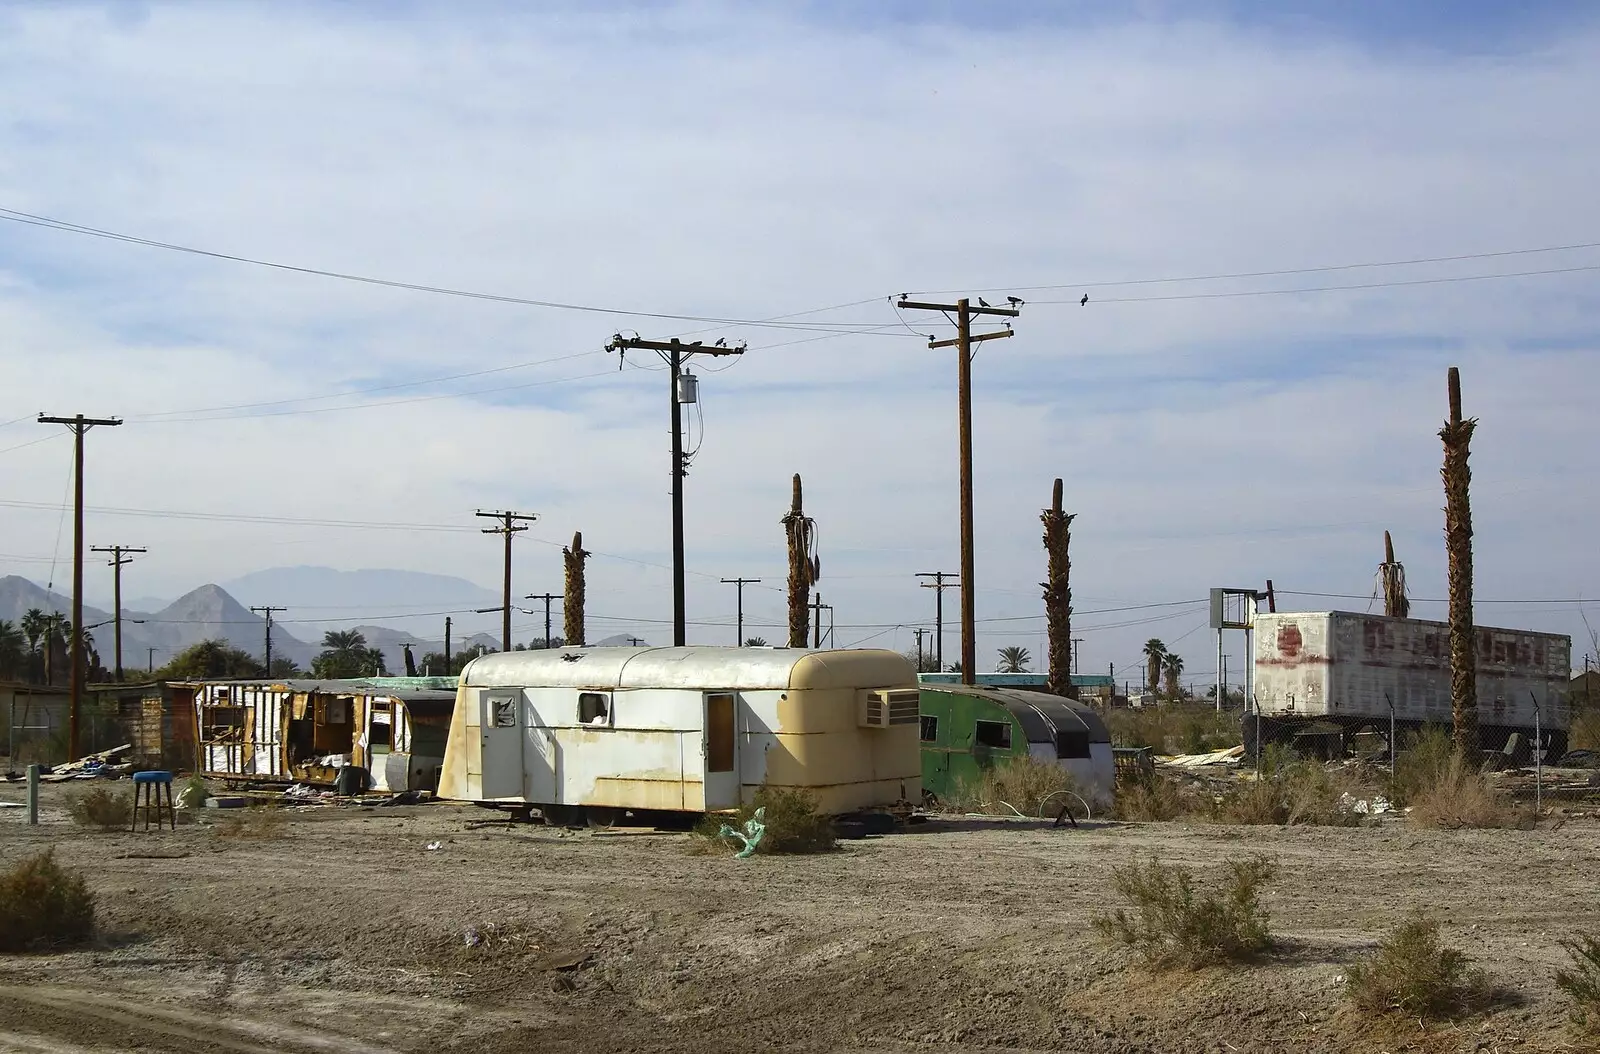 More post-nuclear wasteland, from The End of the World: Julian to the Salton Sea and Back, California, US - 1st March 2008